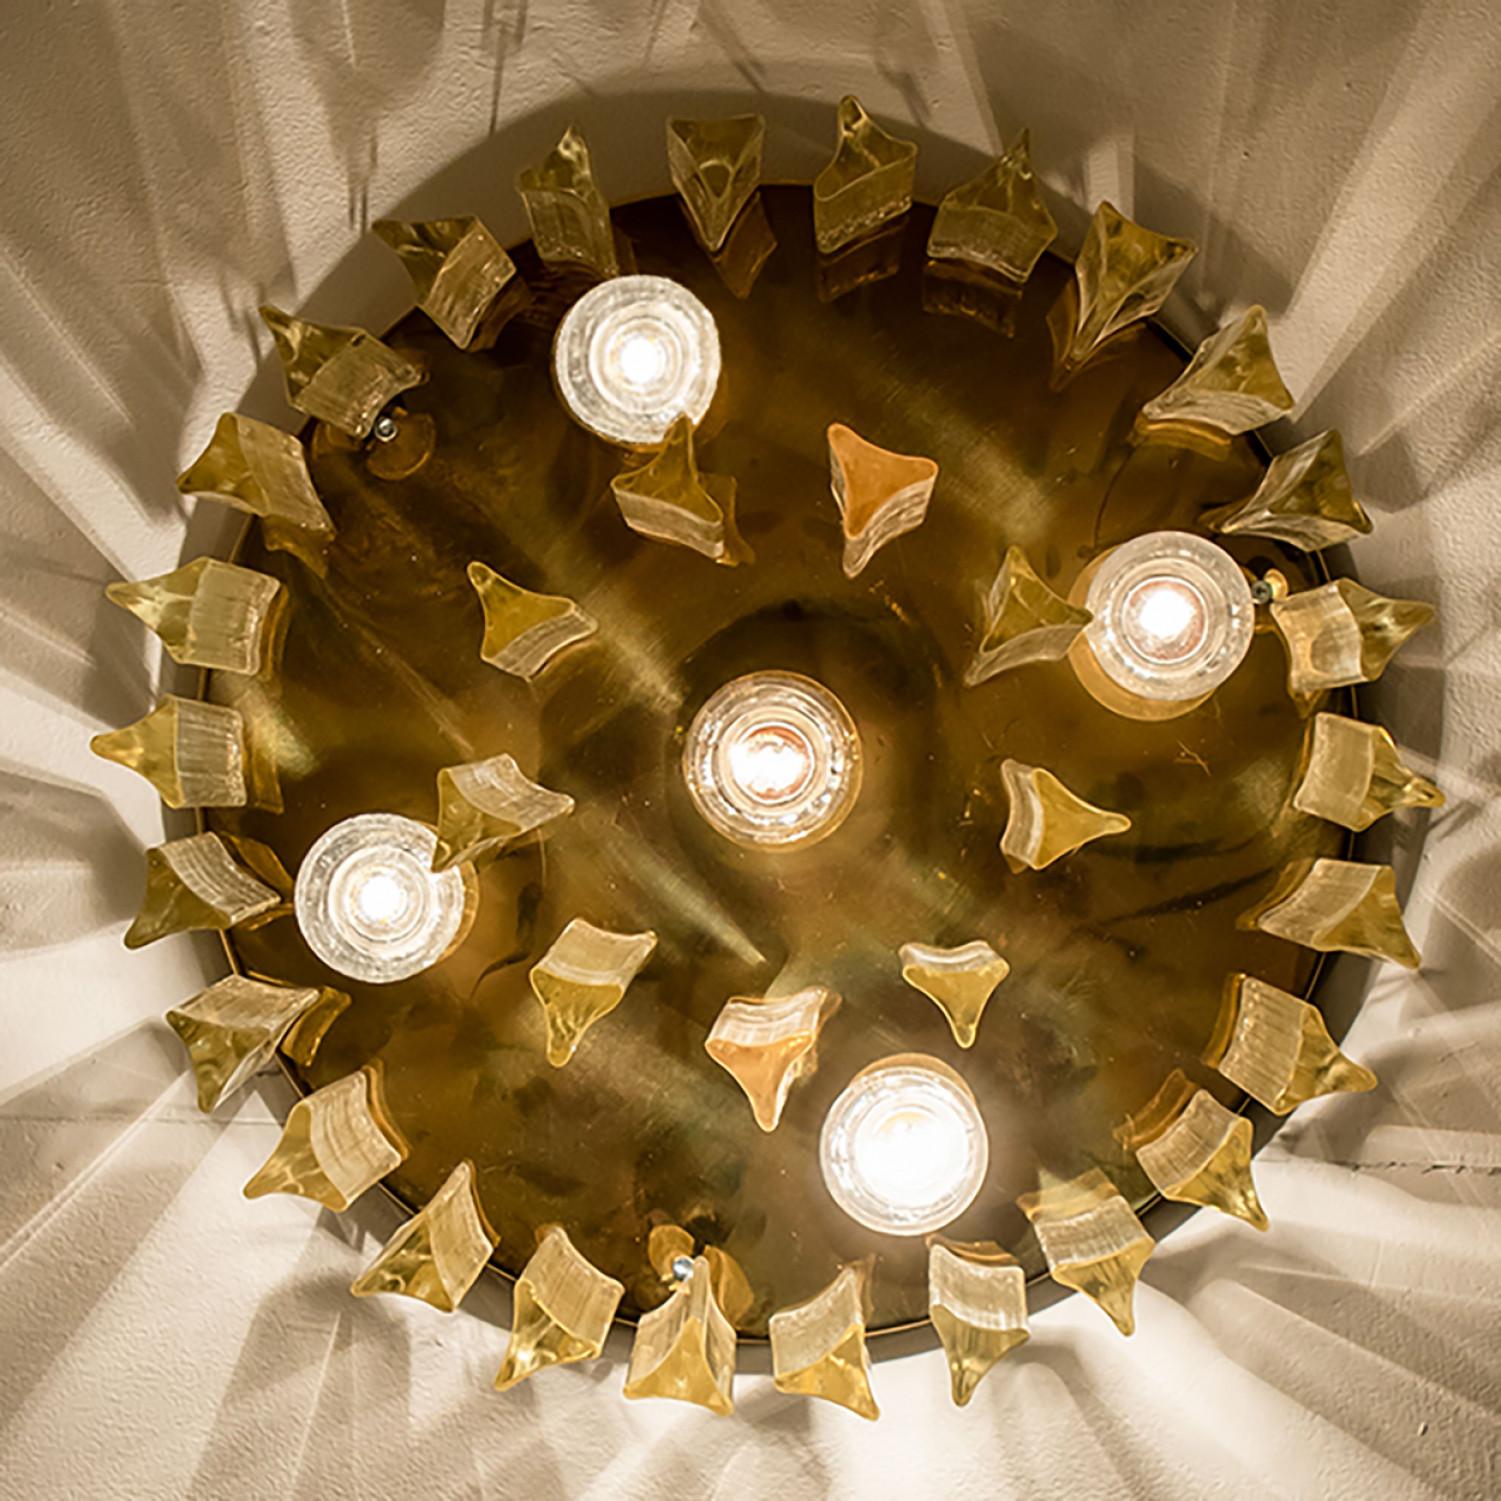 High quality midcentury brass and clear crystal glass flush mount by Ernst Palme, Germany, 1970s.
The flush has a brass ceiling plate, to which crystal triedro glass elements are attached.

Dimensions:
Height: 11.81